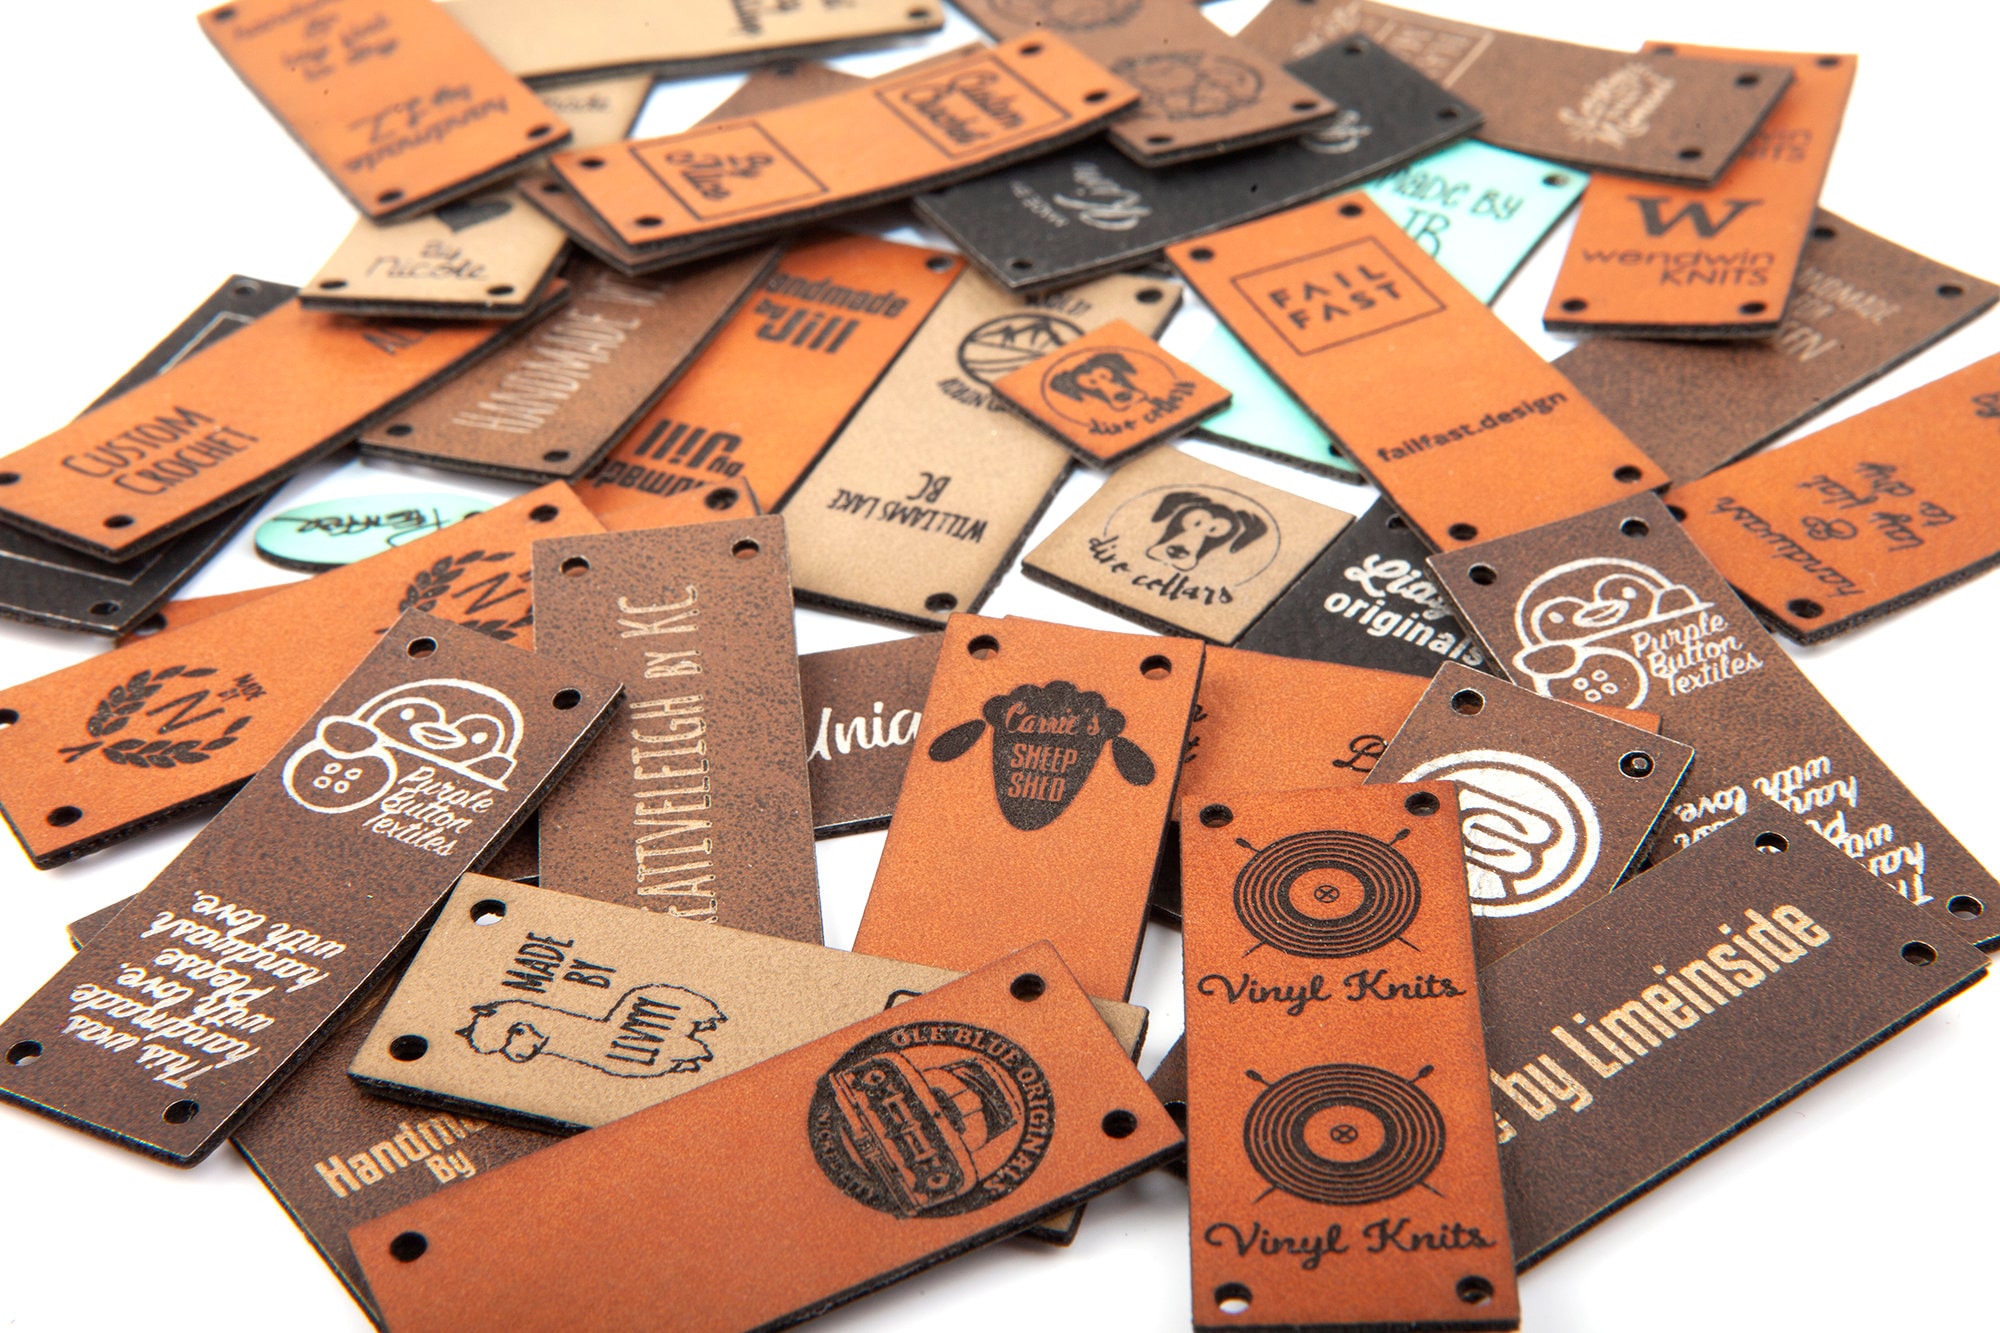 Tags for Handmade Items, Labels for Handmade Items, Leather Labels, Faux  Leather Tags, Vegan Leather Labels, Set of 25 